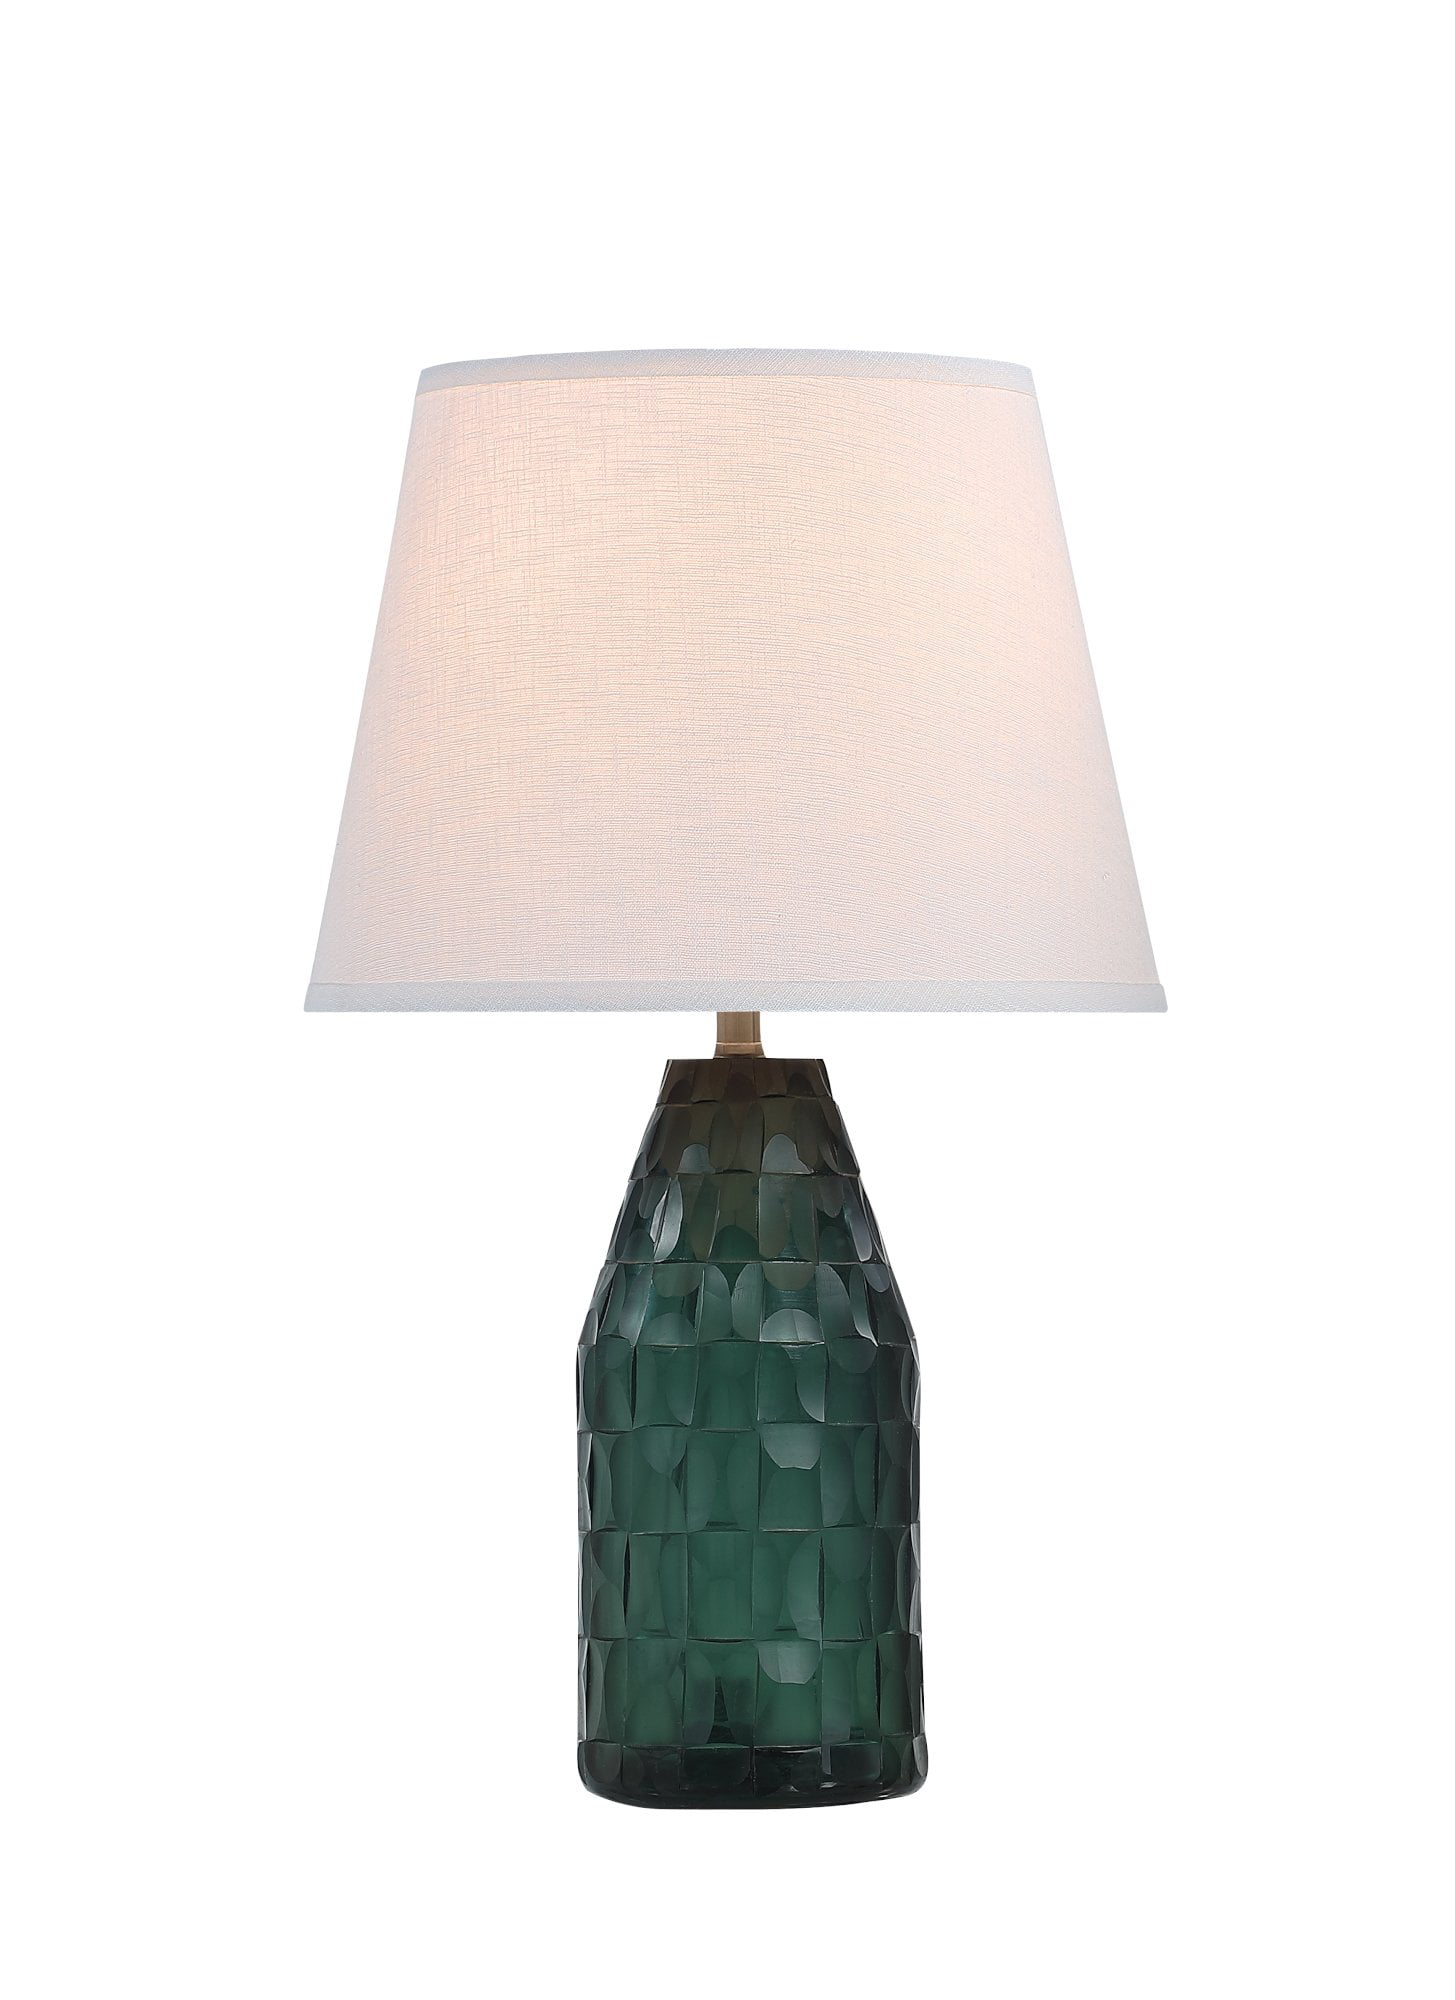 26 High Transitional Shell Hardback Empire Shade in White Aspen Creative 40164-11 14 Wide Table LAMP 